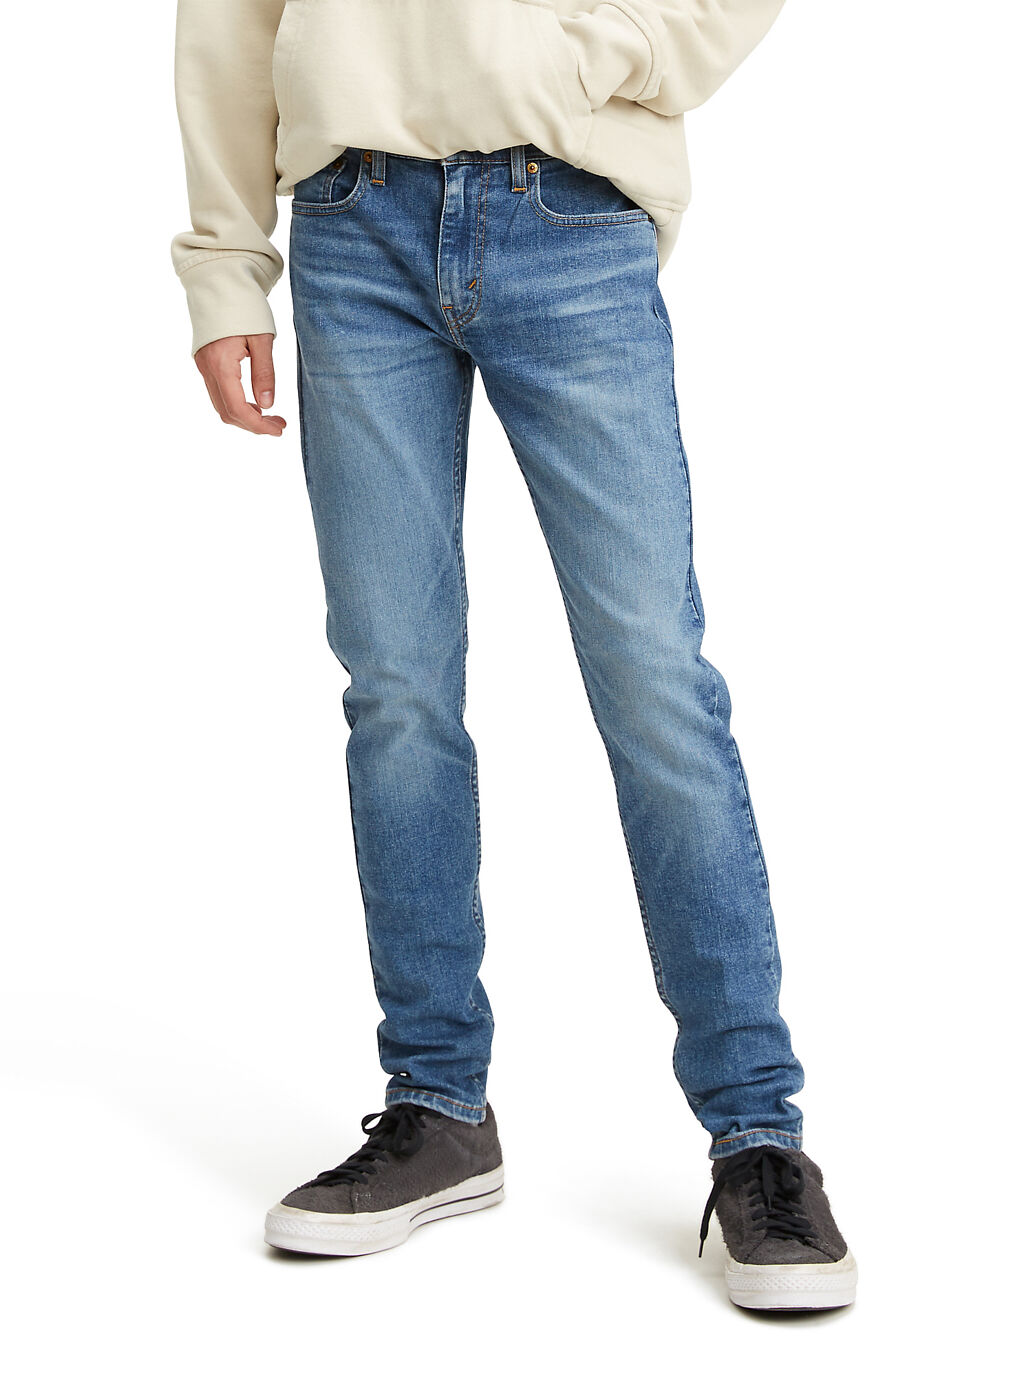 Skinny Tapered Fit Jeans in Tuscany 